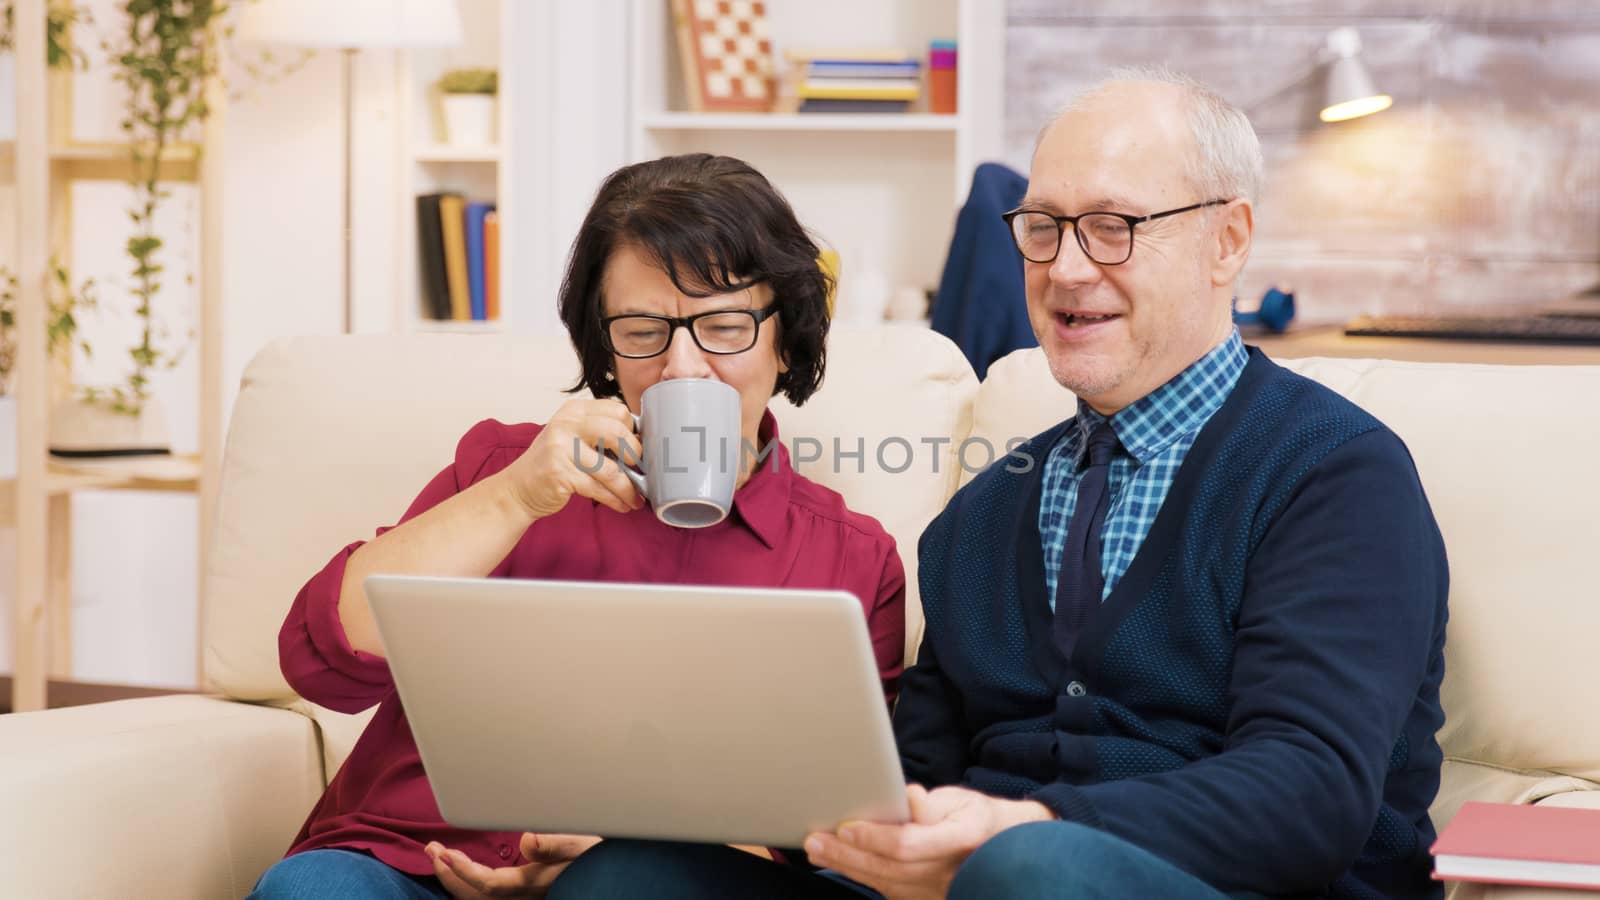 Elderly age couple sitting on sofa holding laptop during a video call. by DCStudio